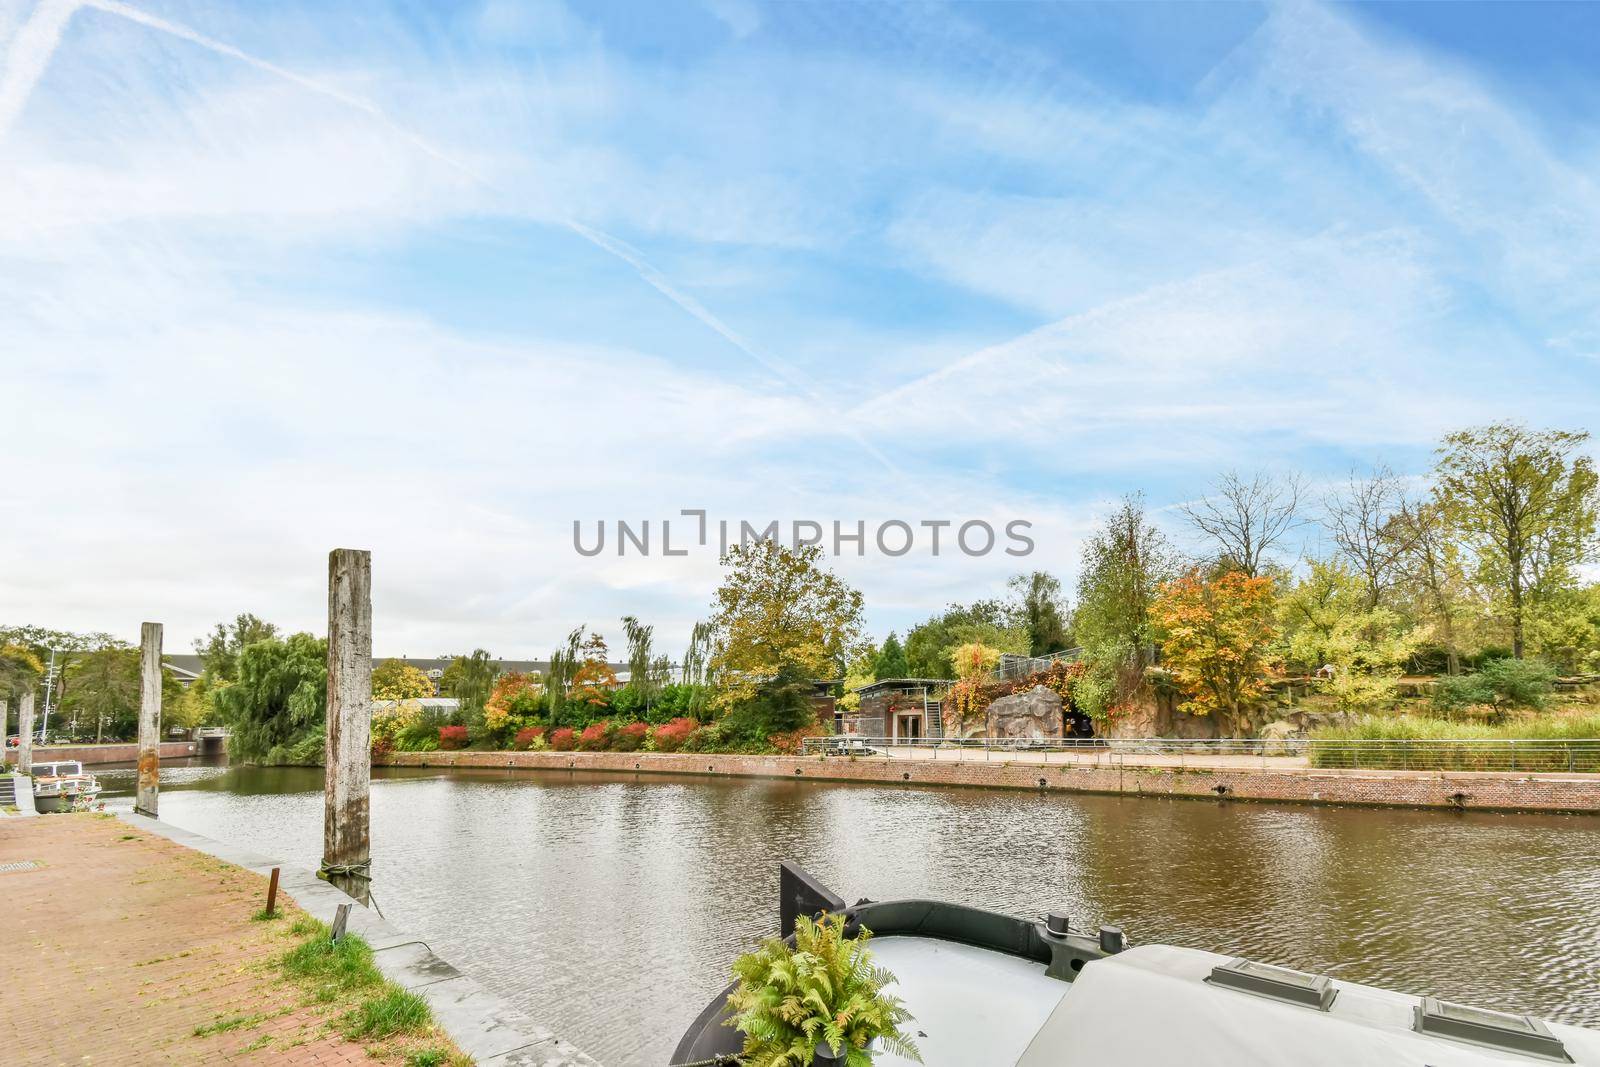 Residential area in countryside by the river